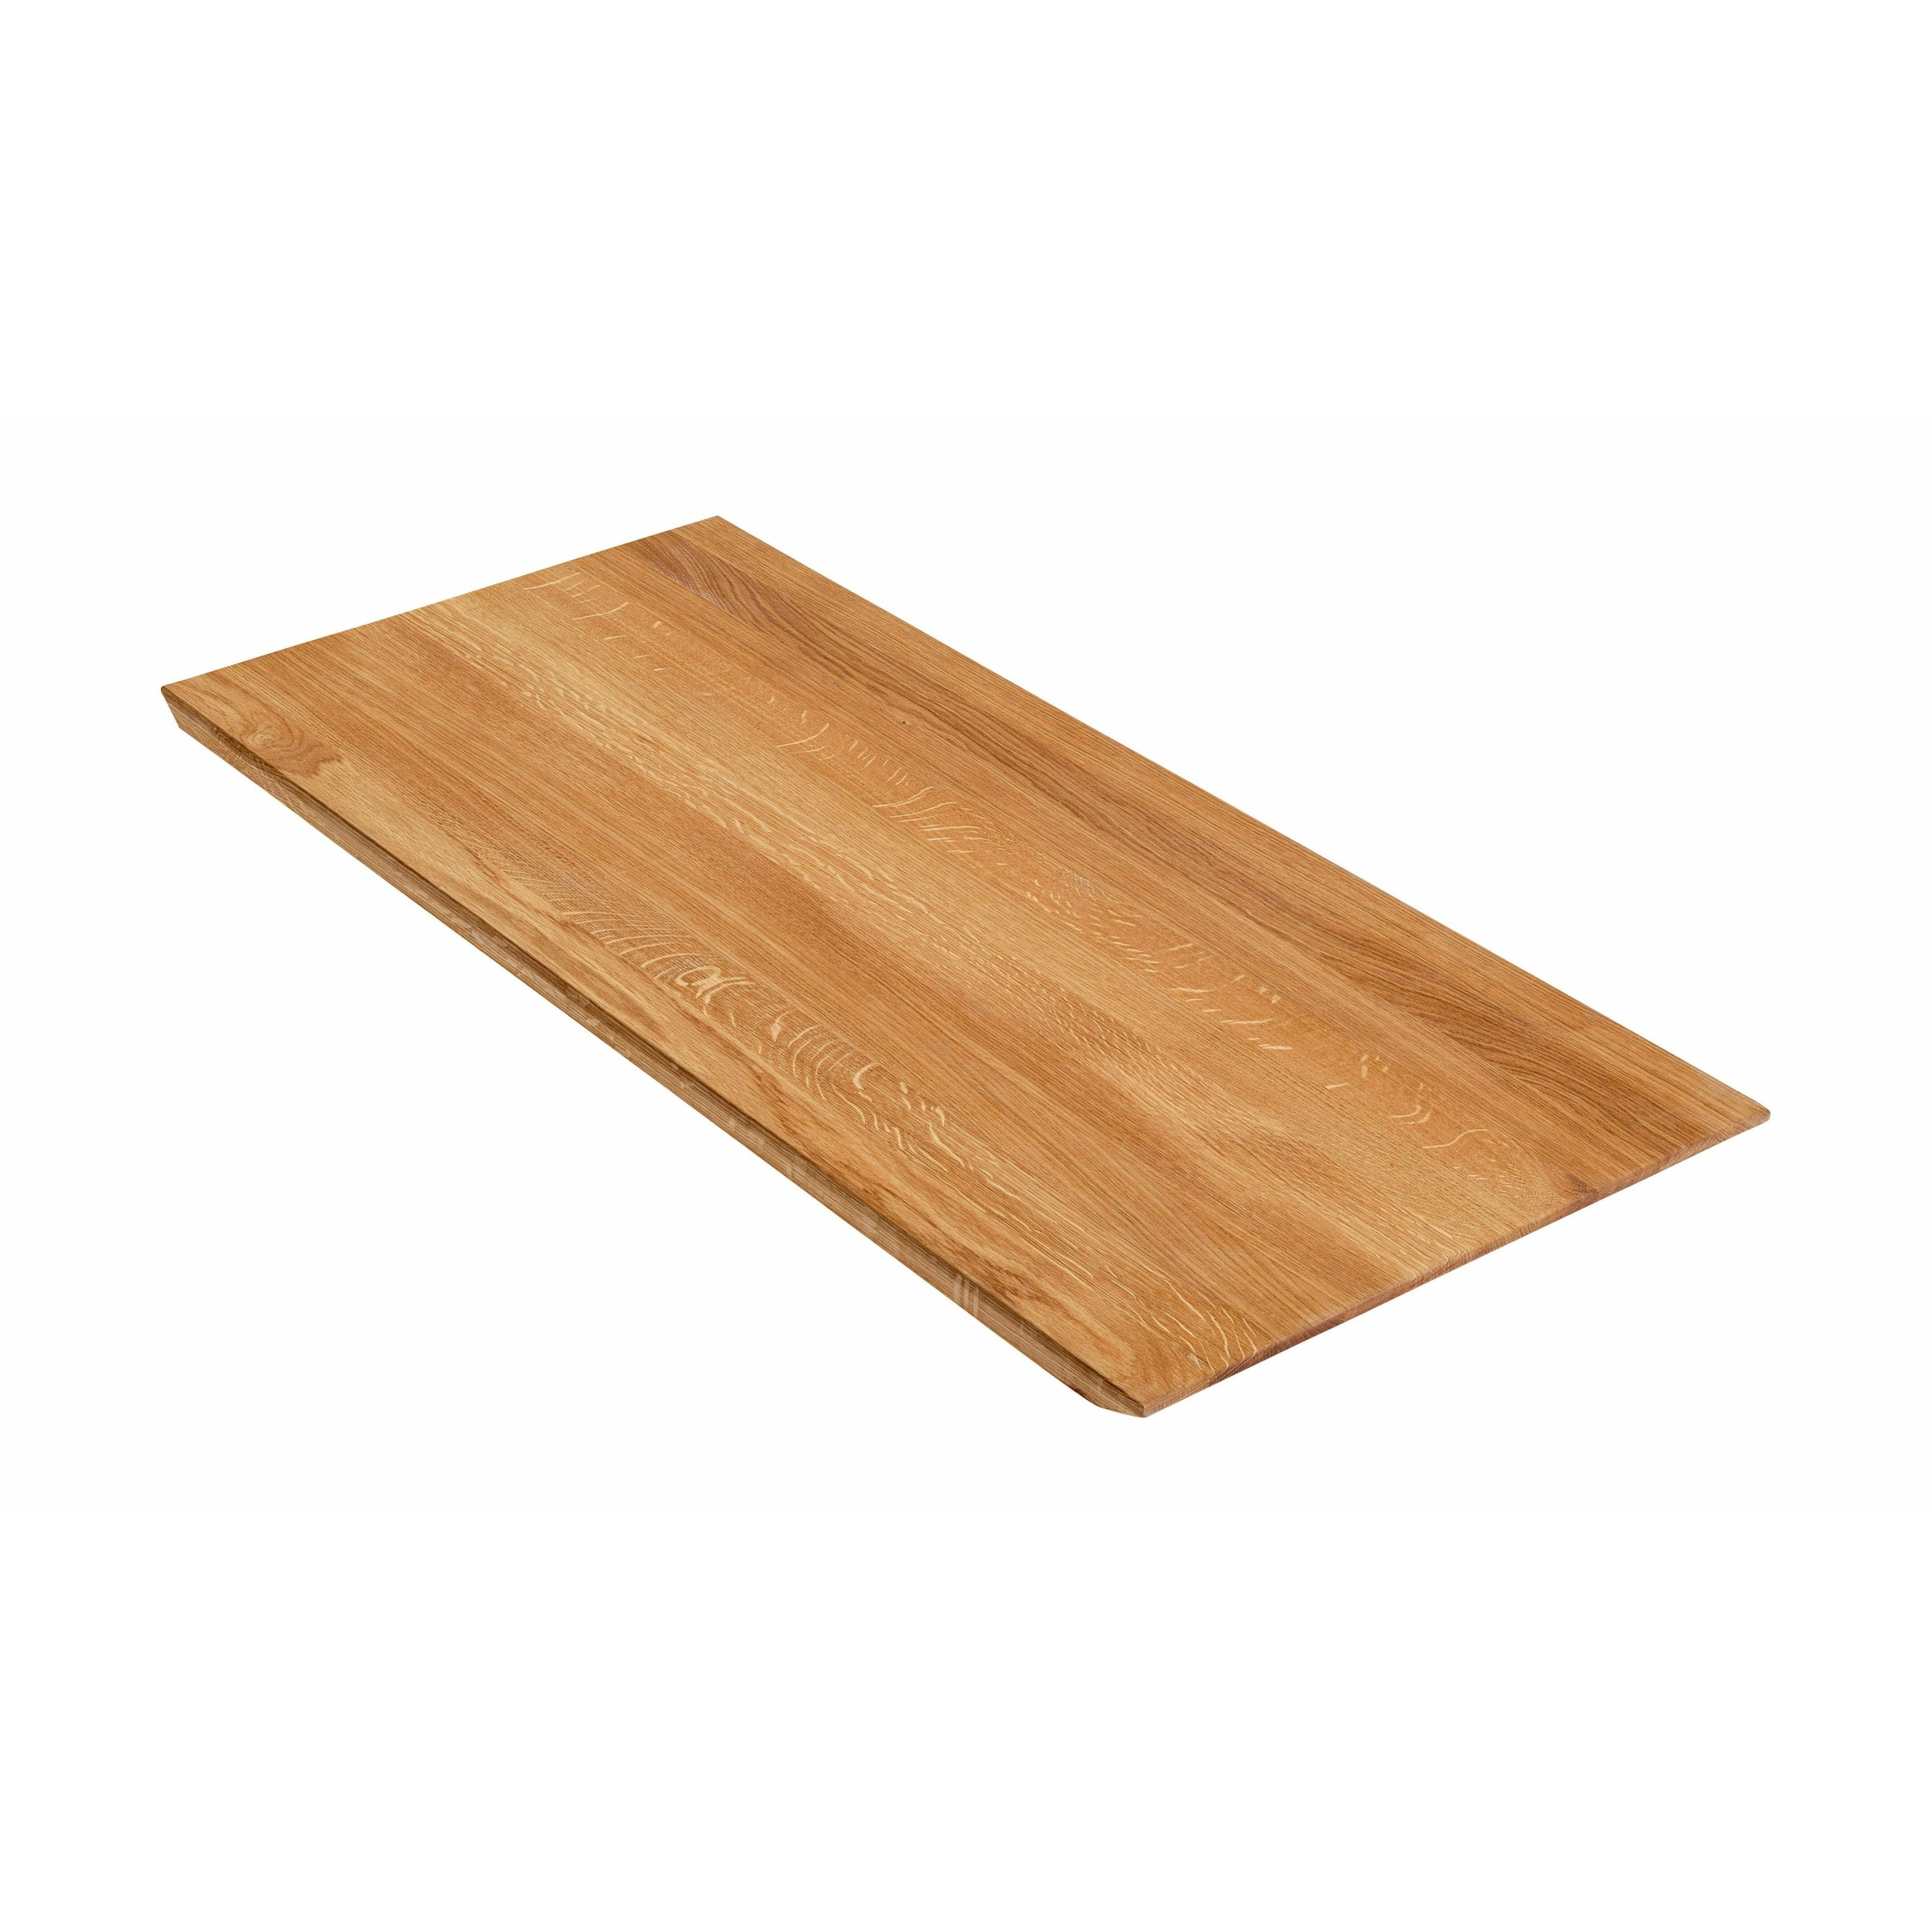 Muubs Space Expansion Plate 100 cm, naturale